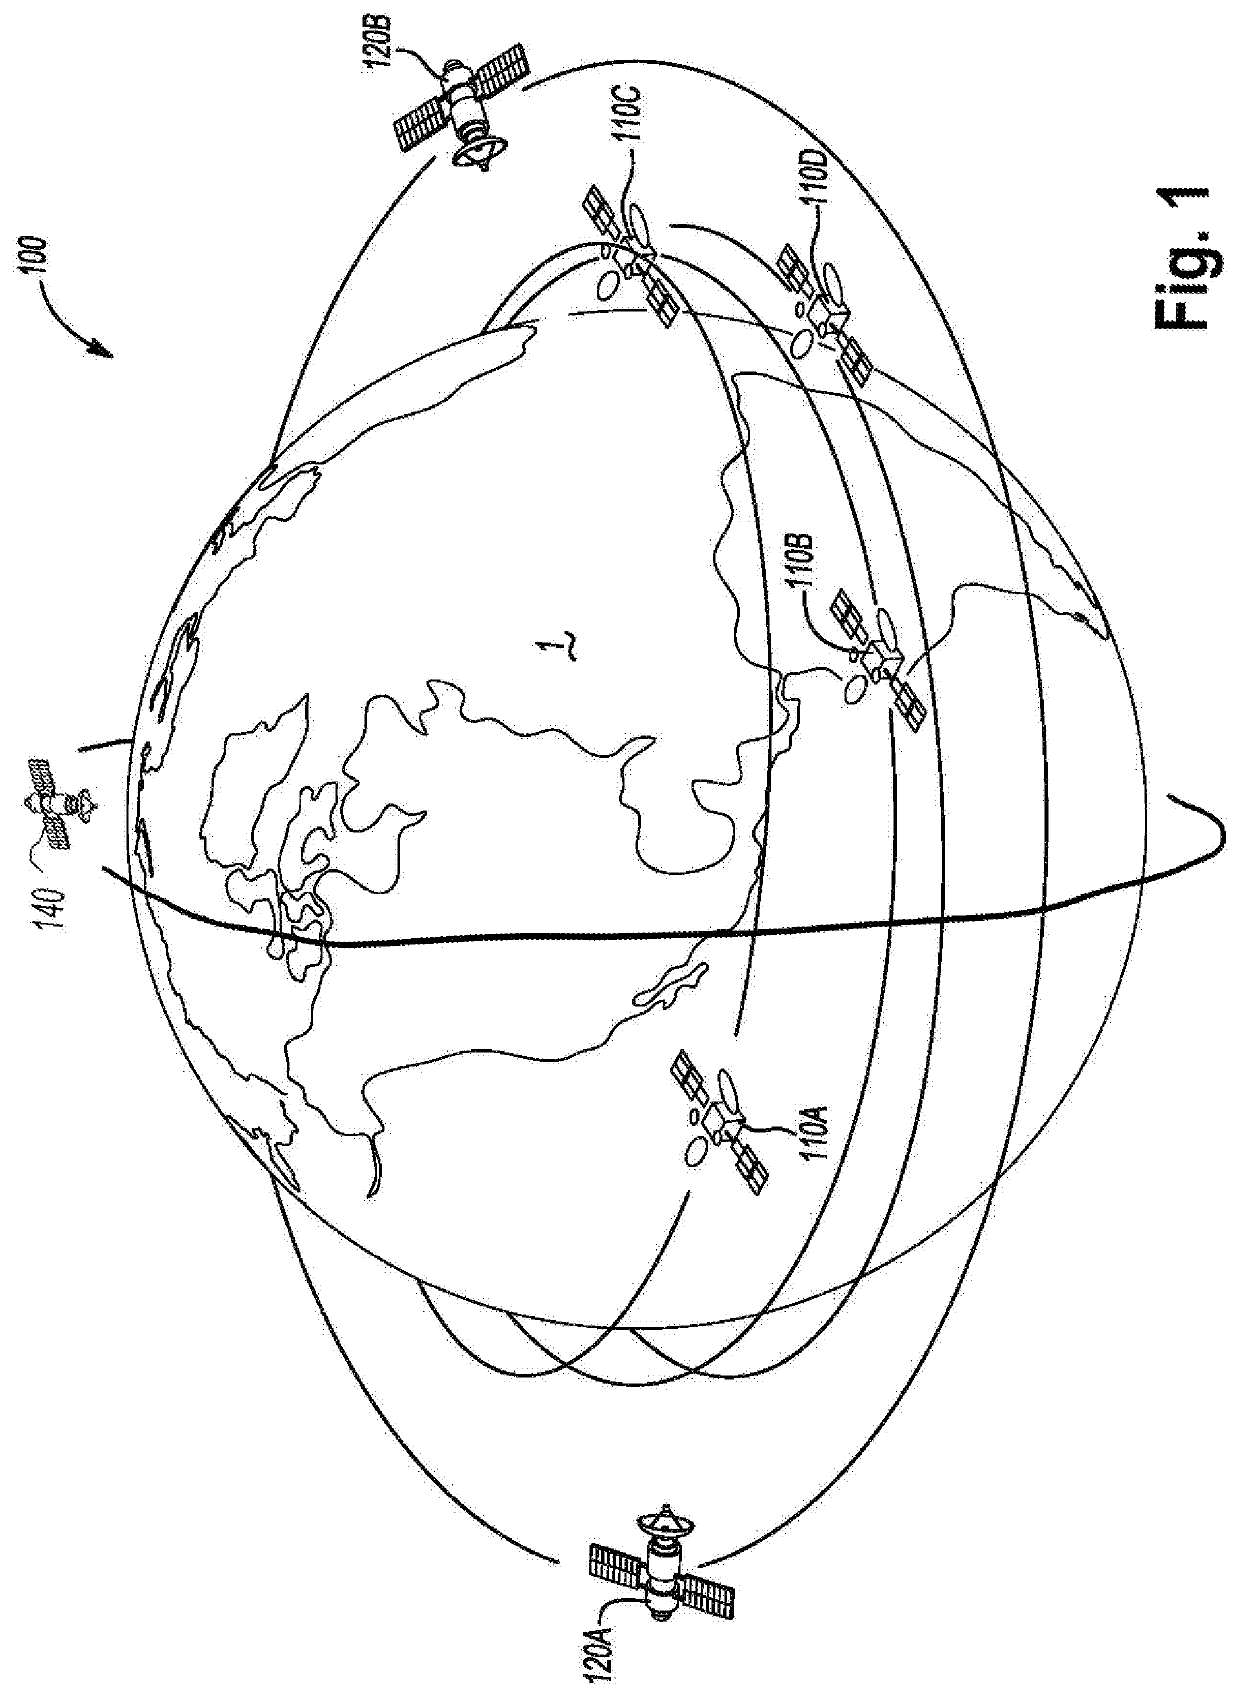 Earth observation satellite information routing system